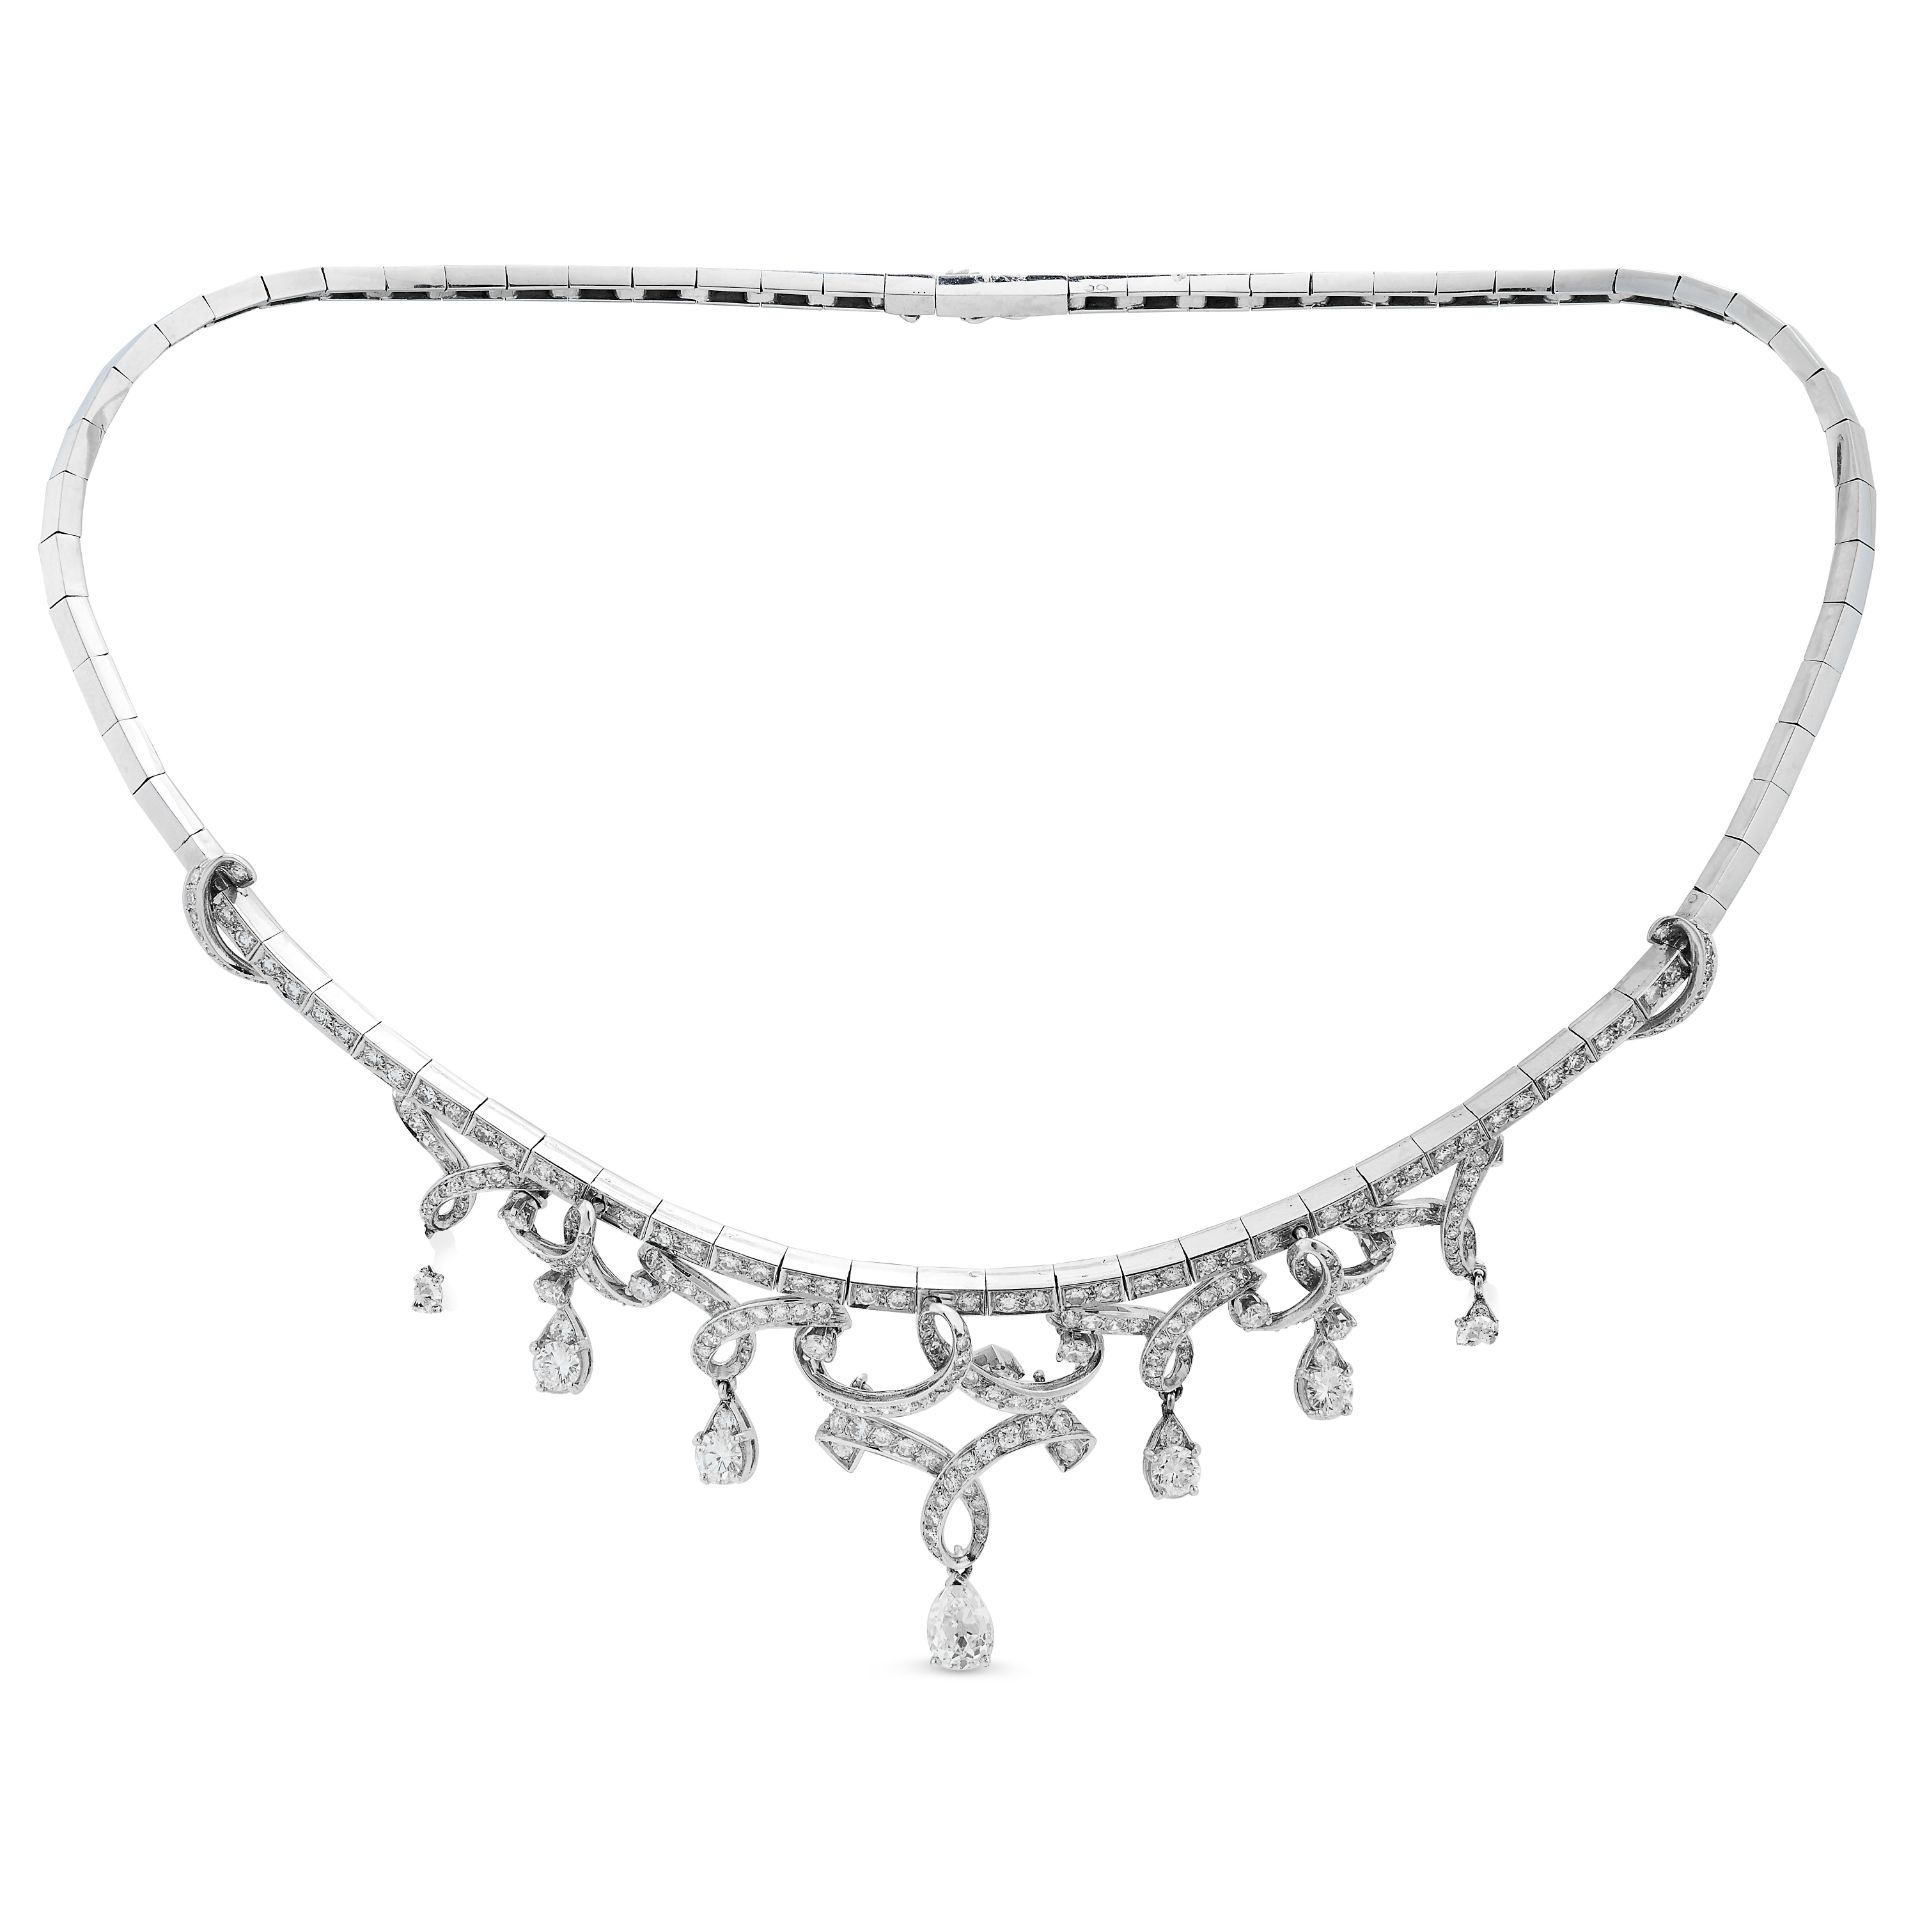 A FRENCH DIAMOND NECKLACE in 18ct white gold, in scrolling design set throughout with round